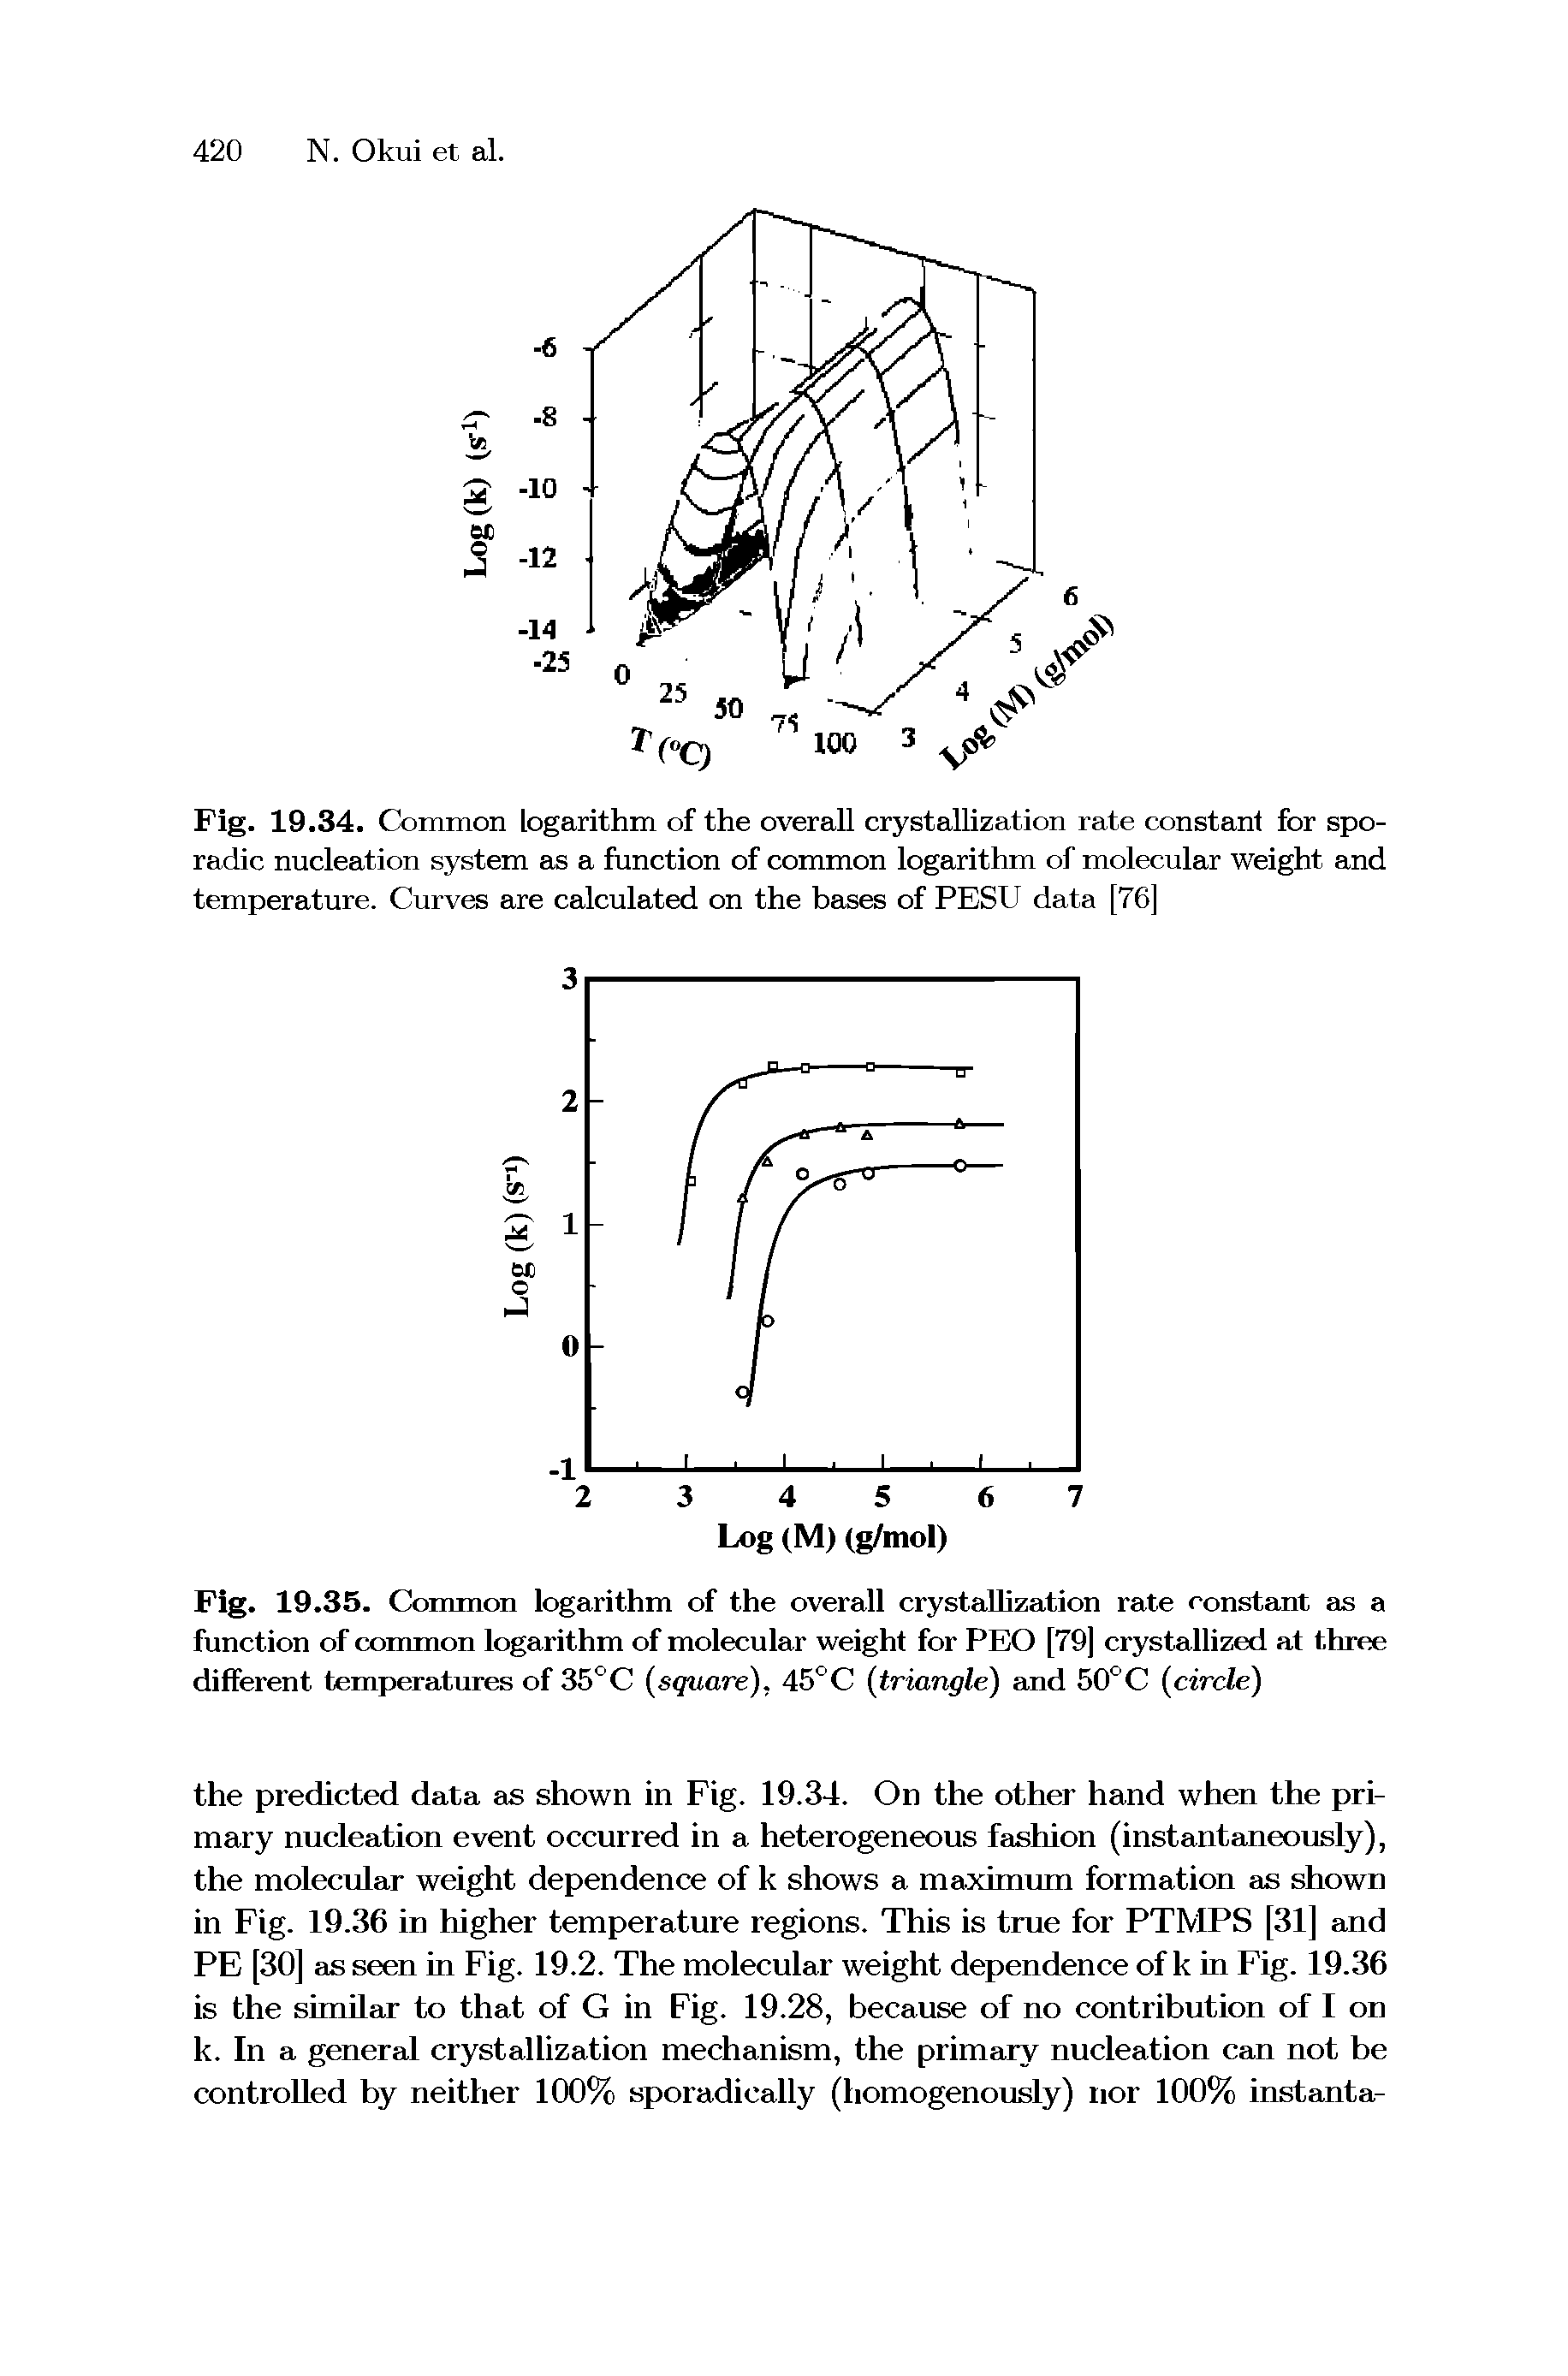 Fig. 19.34. Common logarithm of the overall crystallization rate constant for sporadic nucleation system as a function of common logarithm of molecular weight and temperature. Curves are calculated on the bases of PESU data [76]...